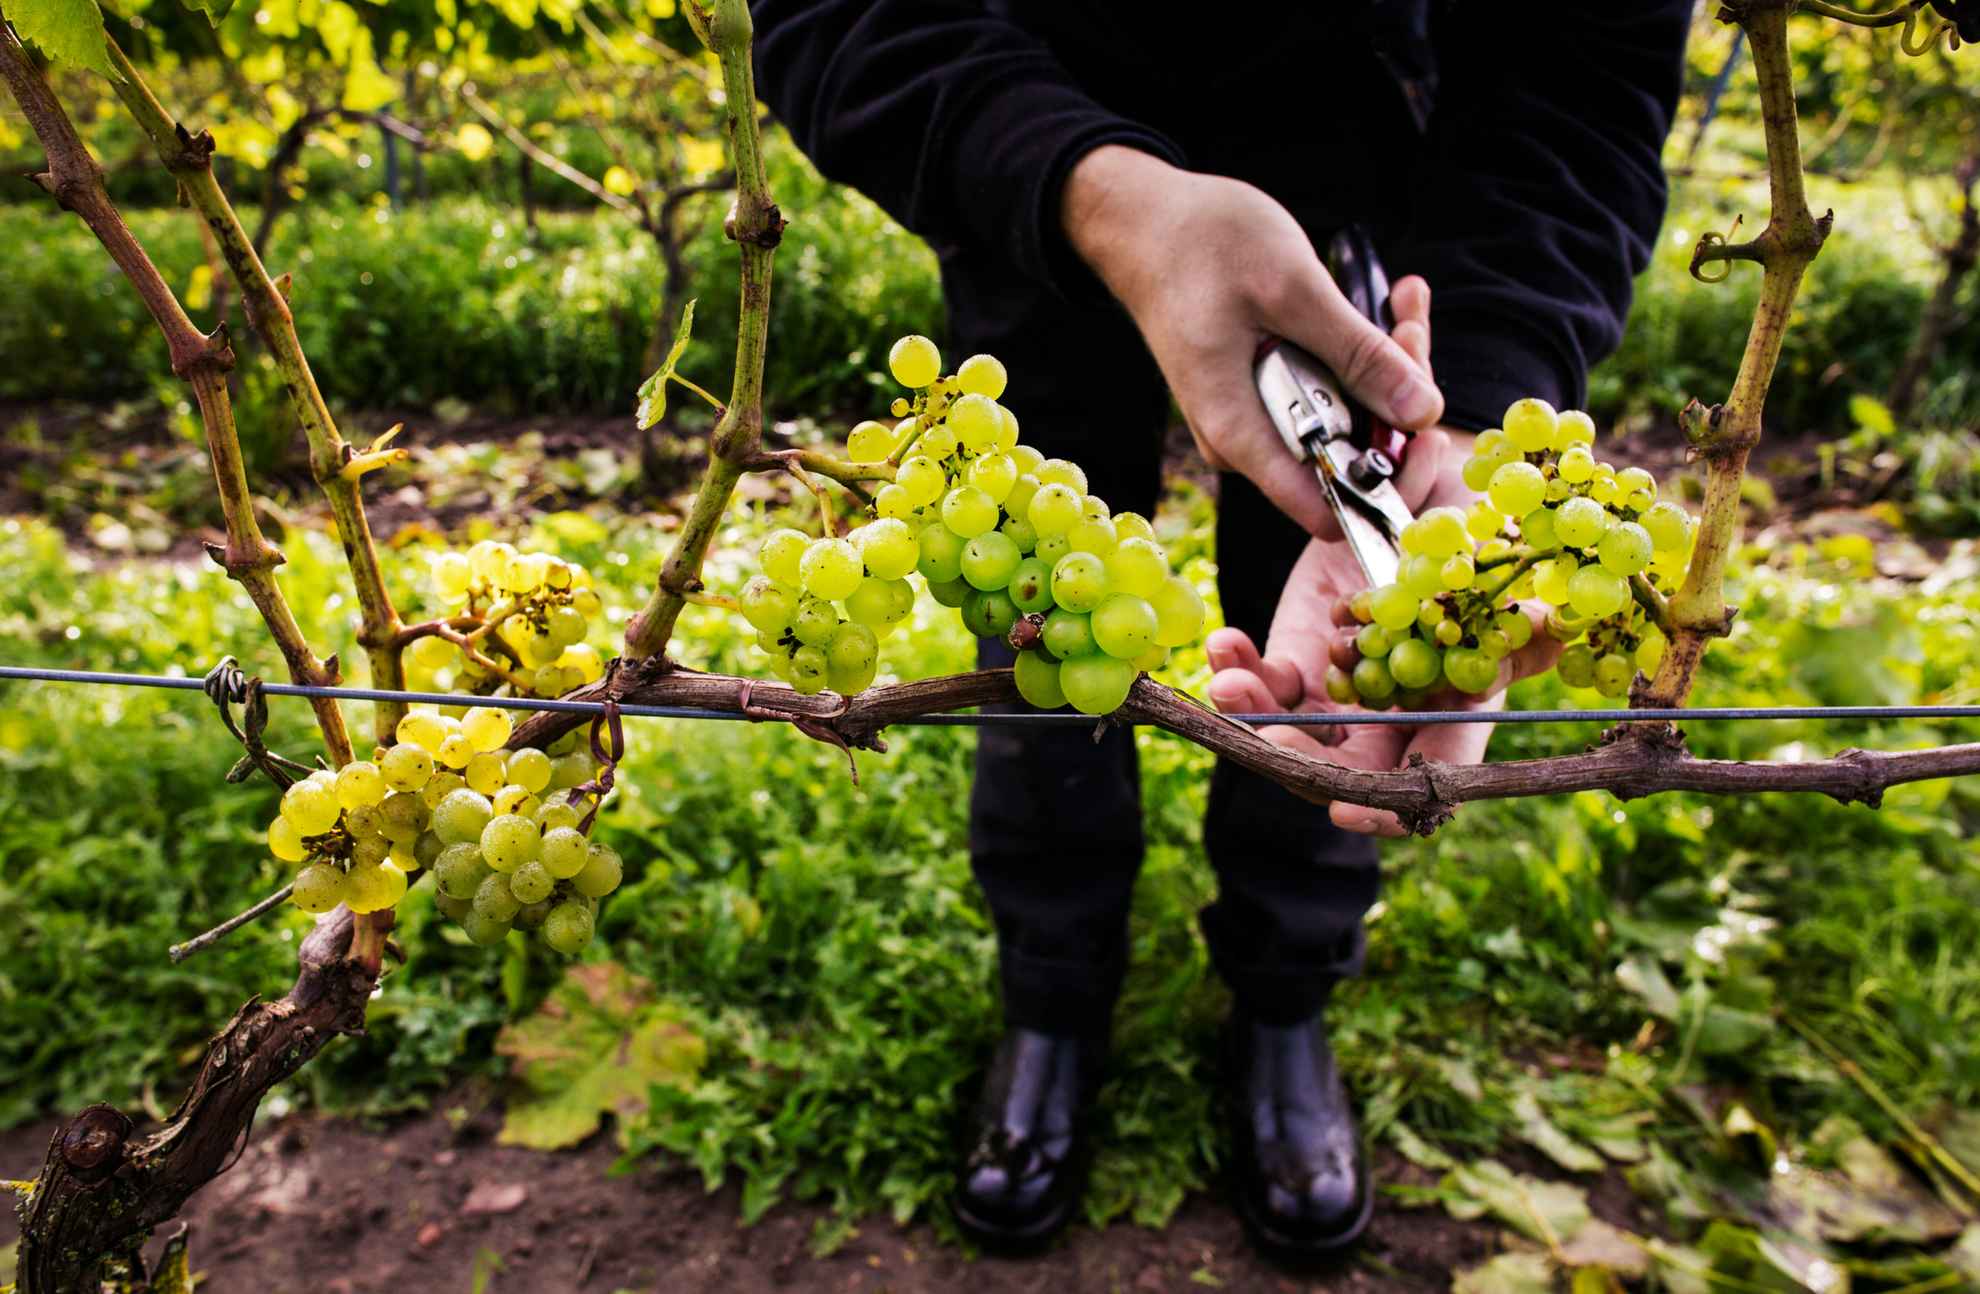 A person is cutting off grapes from a vine.